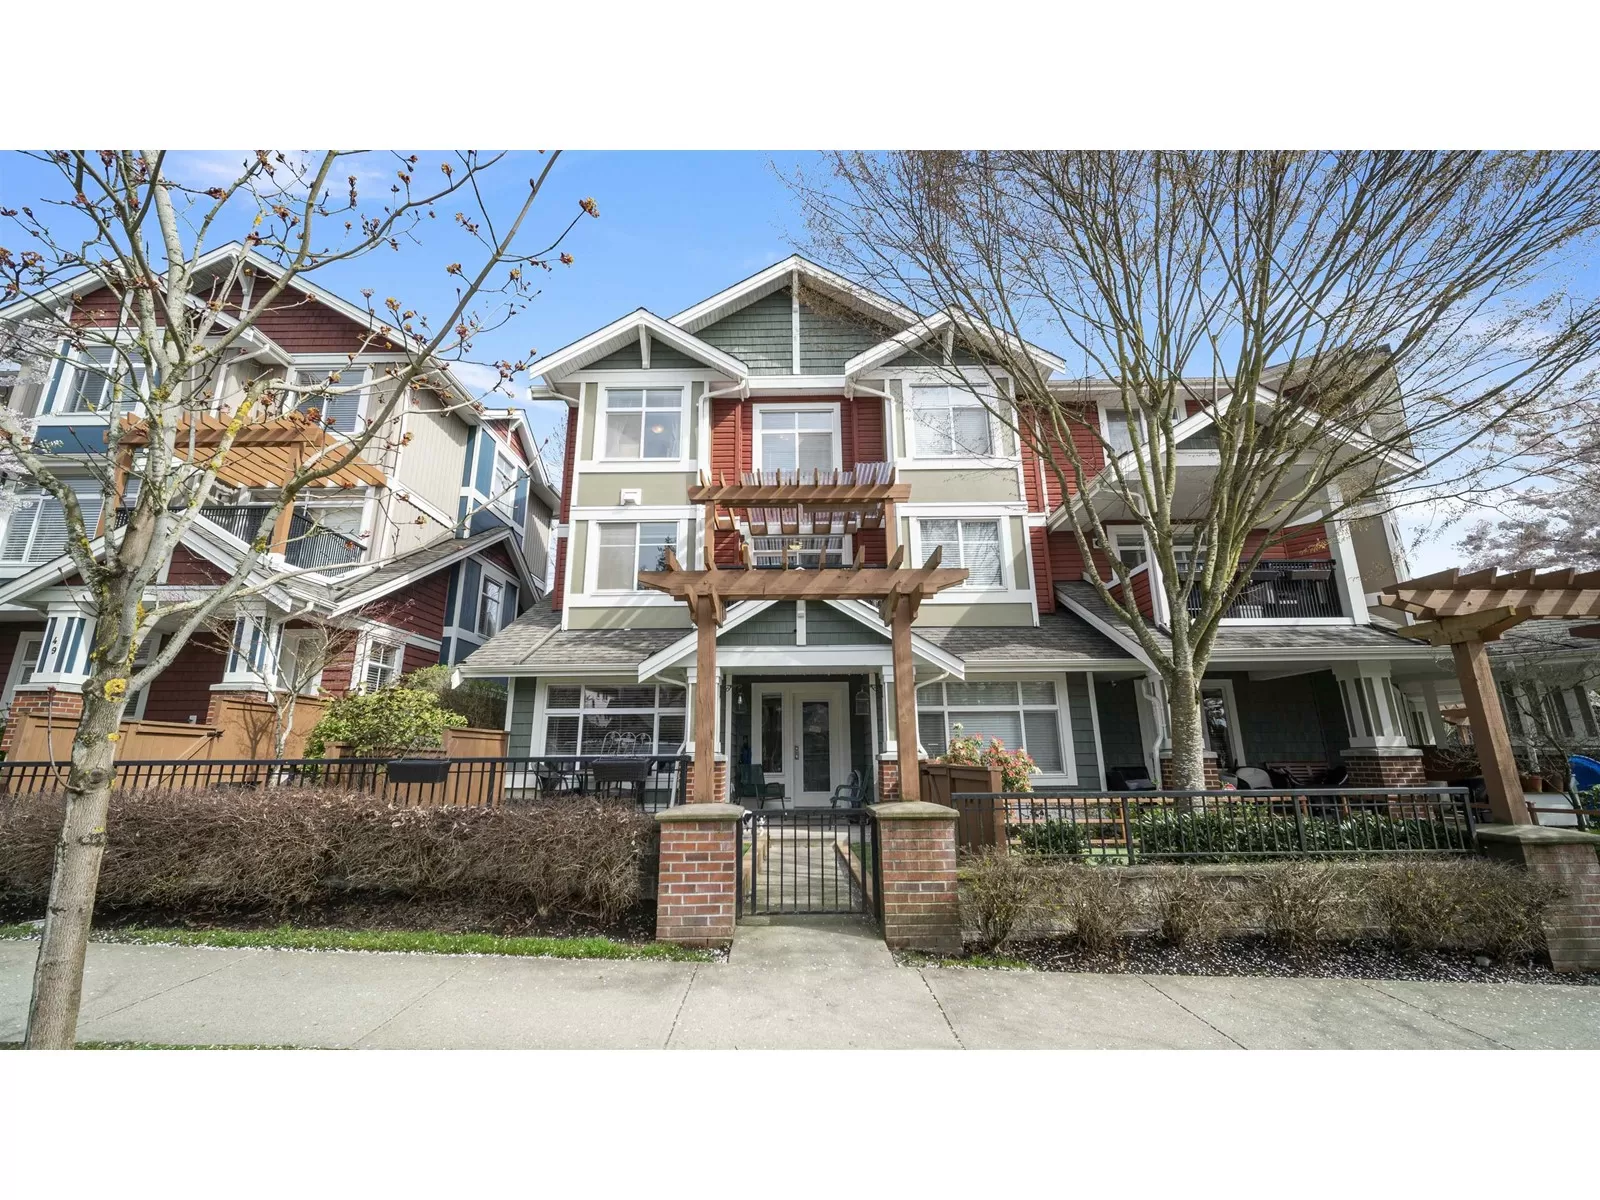 Row / Townhouse for rent: 44 6036 164 Street, Surrey, British Columbia V3S 3Y5